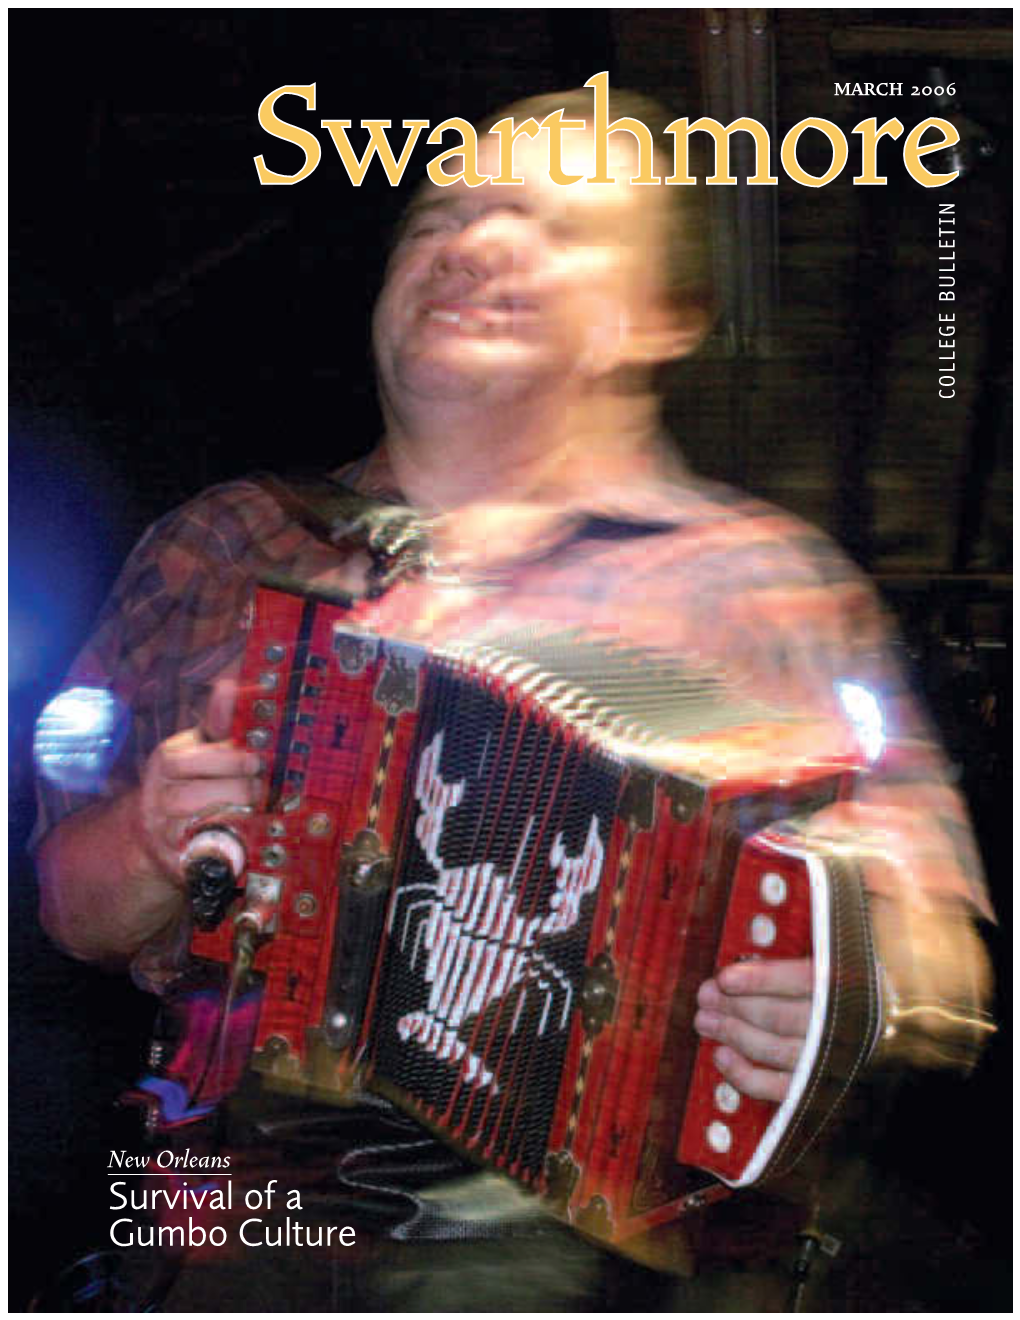 Swarthmore College Bulletin (March 2006)